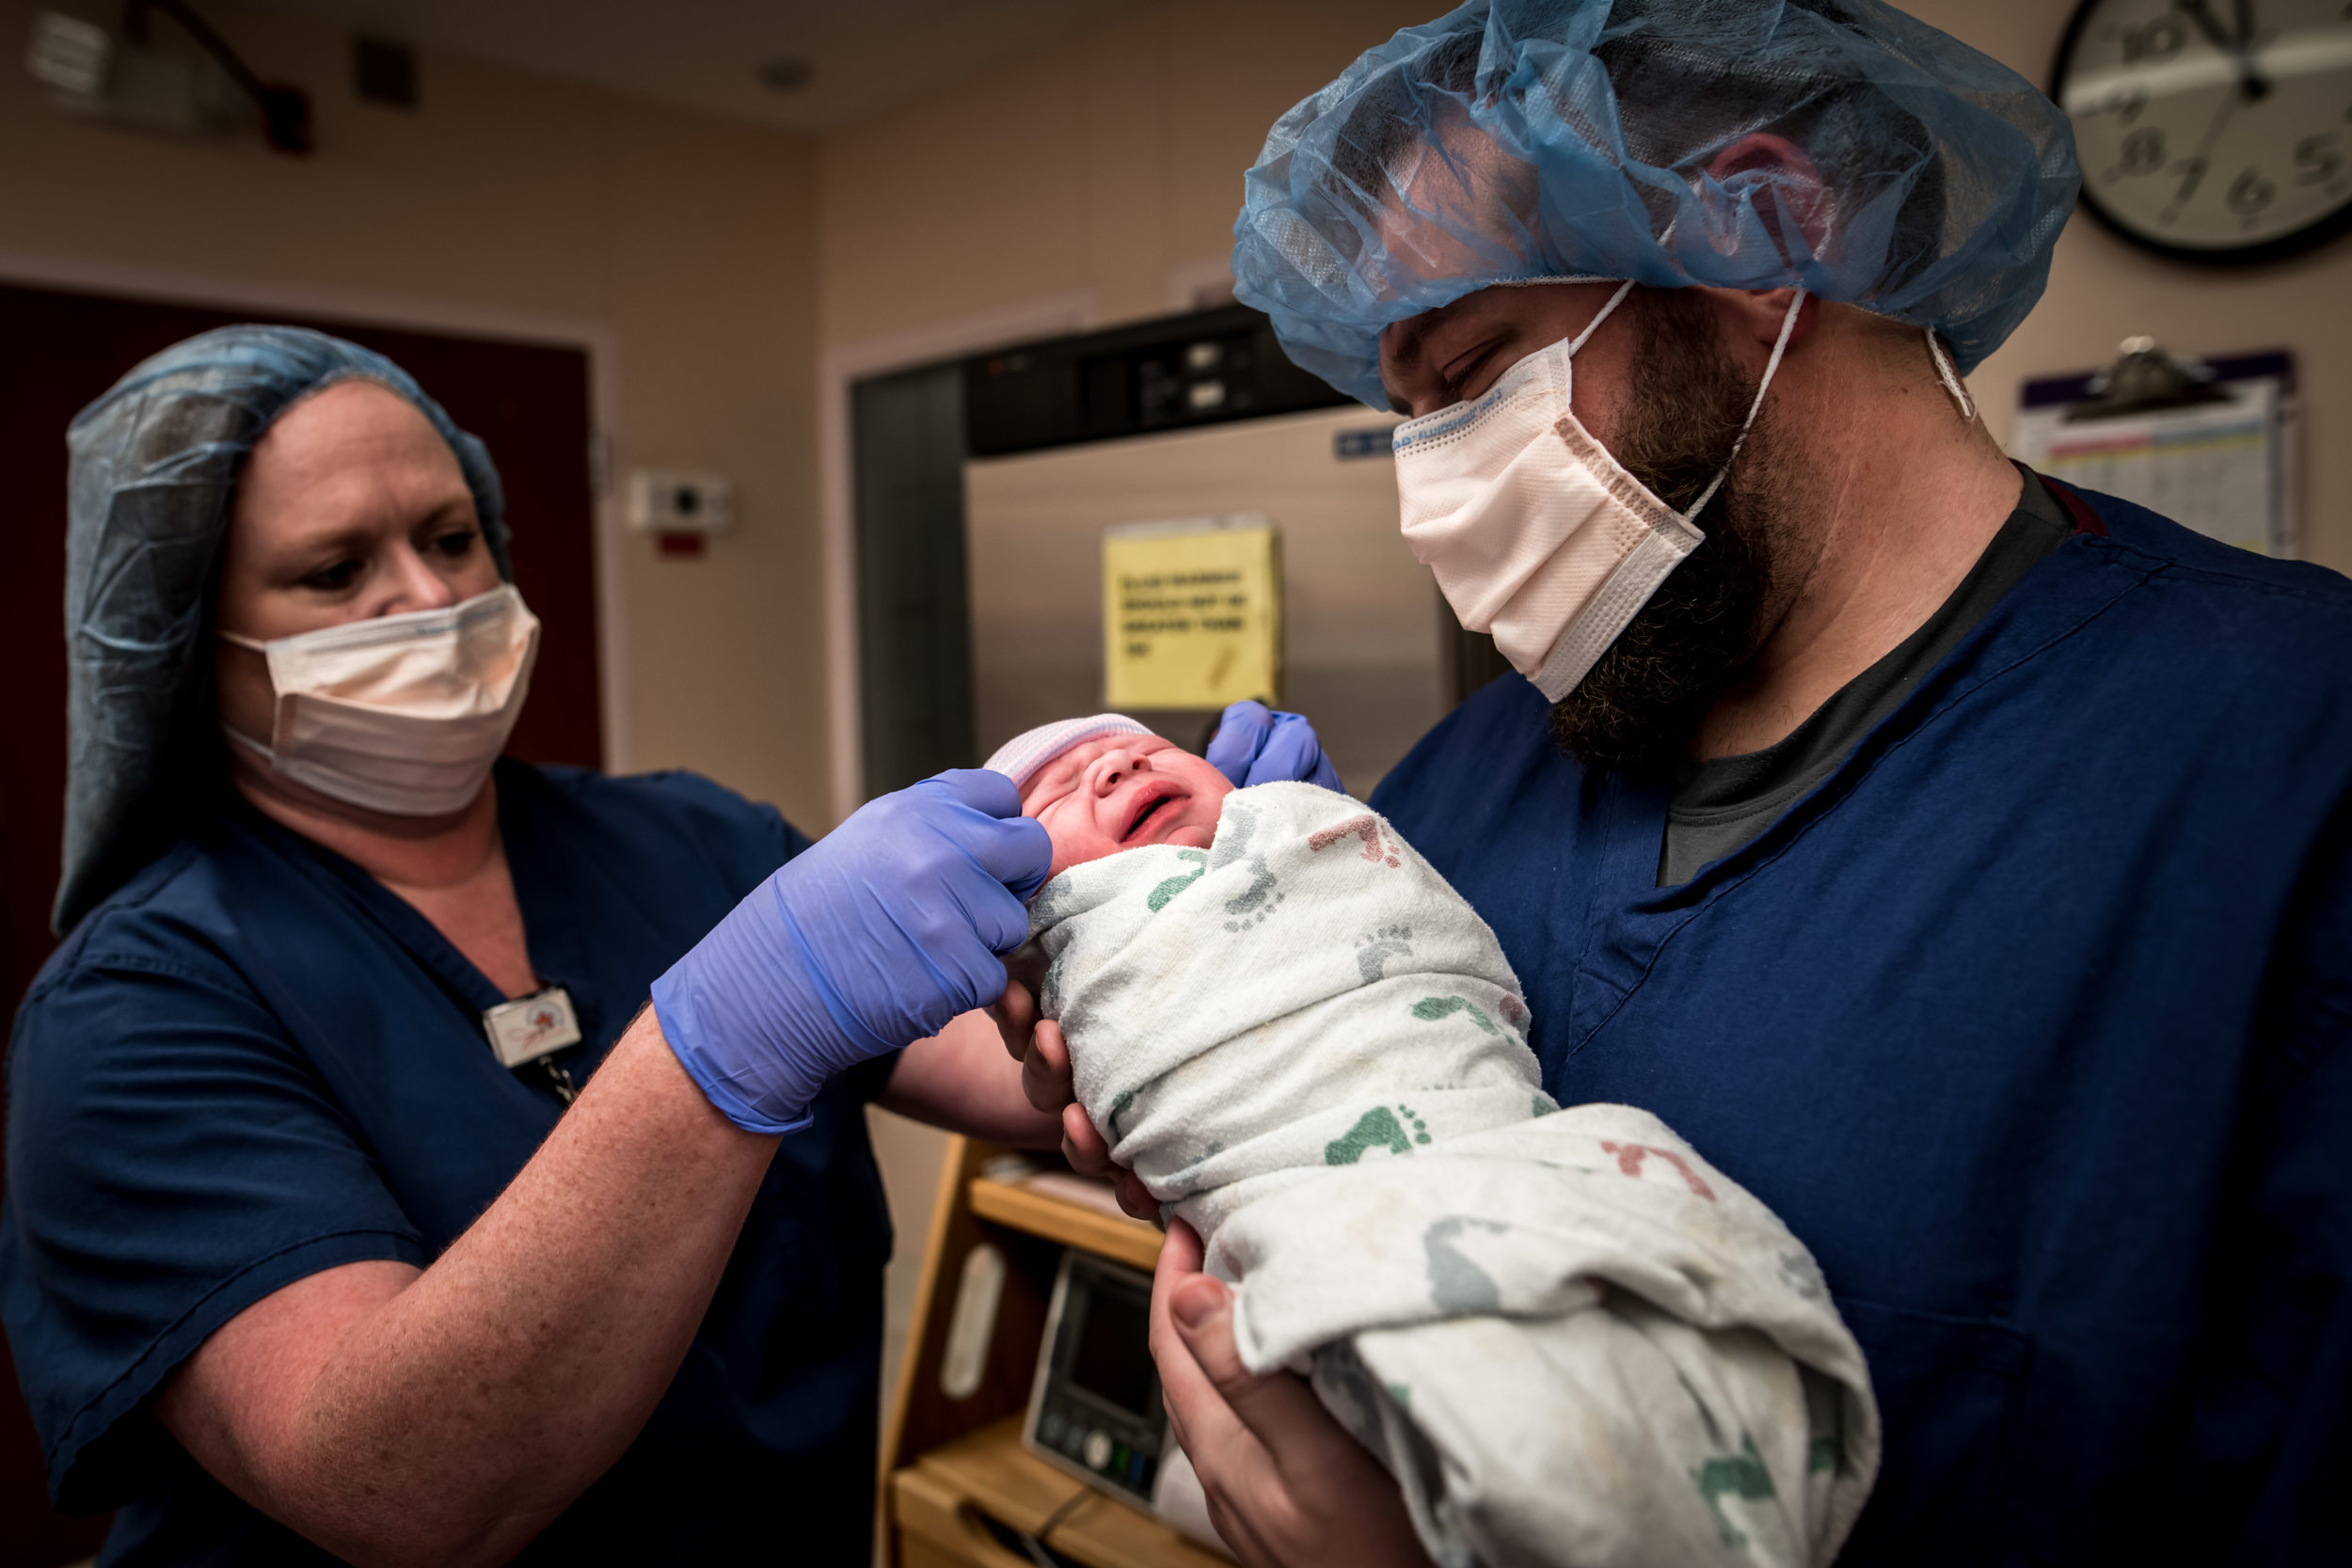 Dad admires his new son after a c-section birth